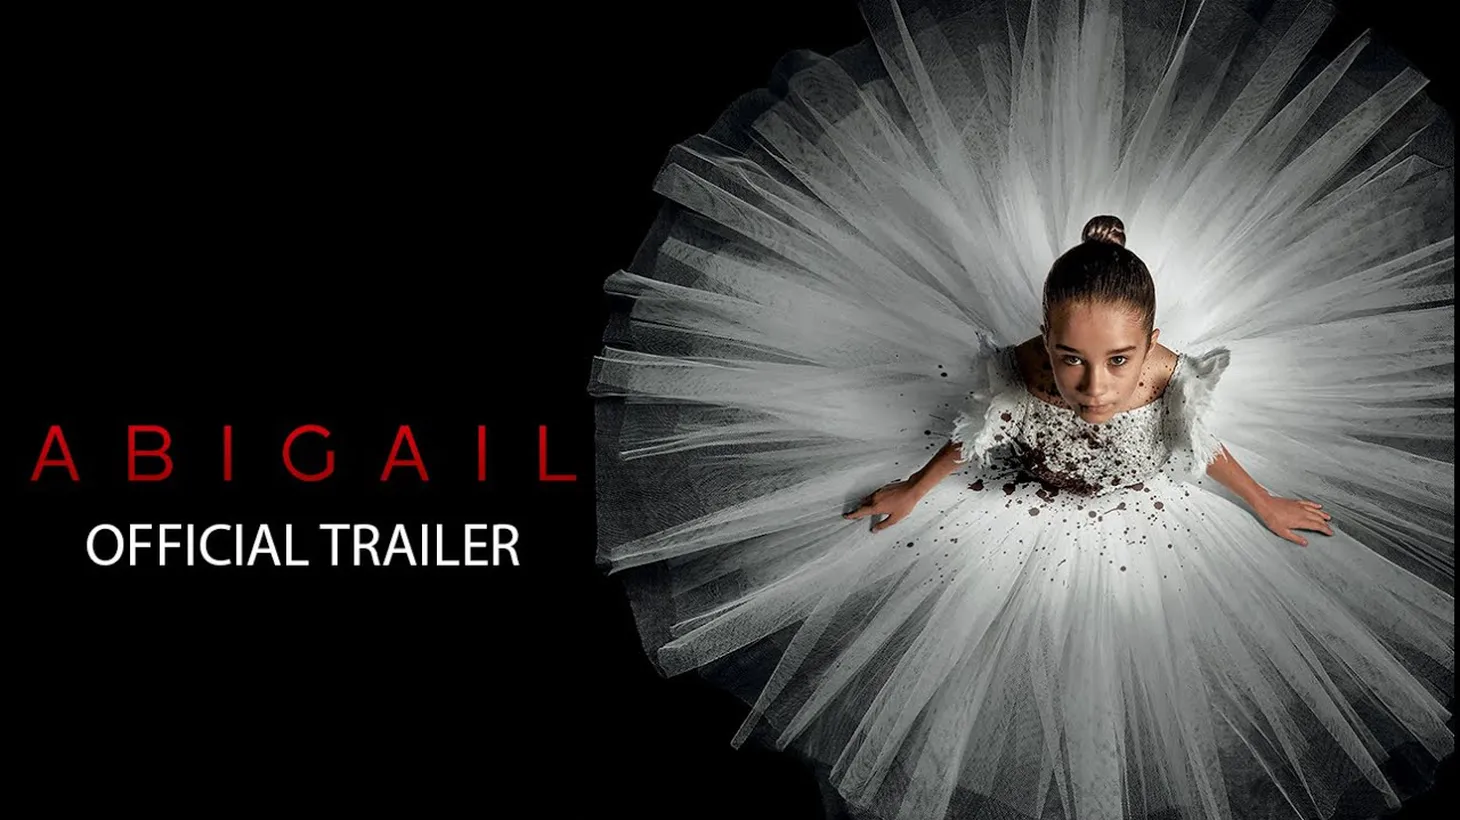 “Abigail” follows a group of people who kidnap children for ransom.